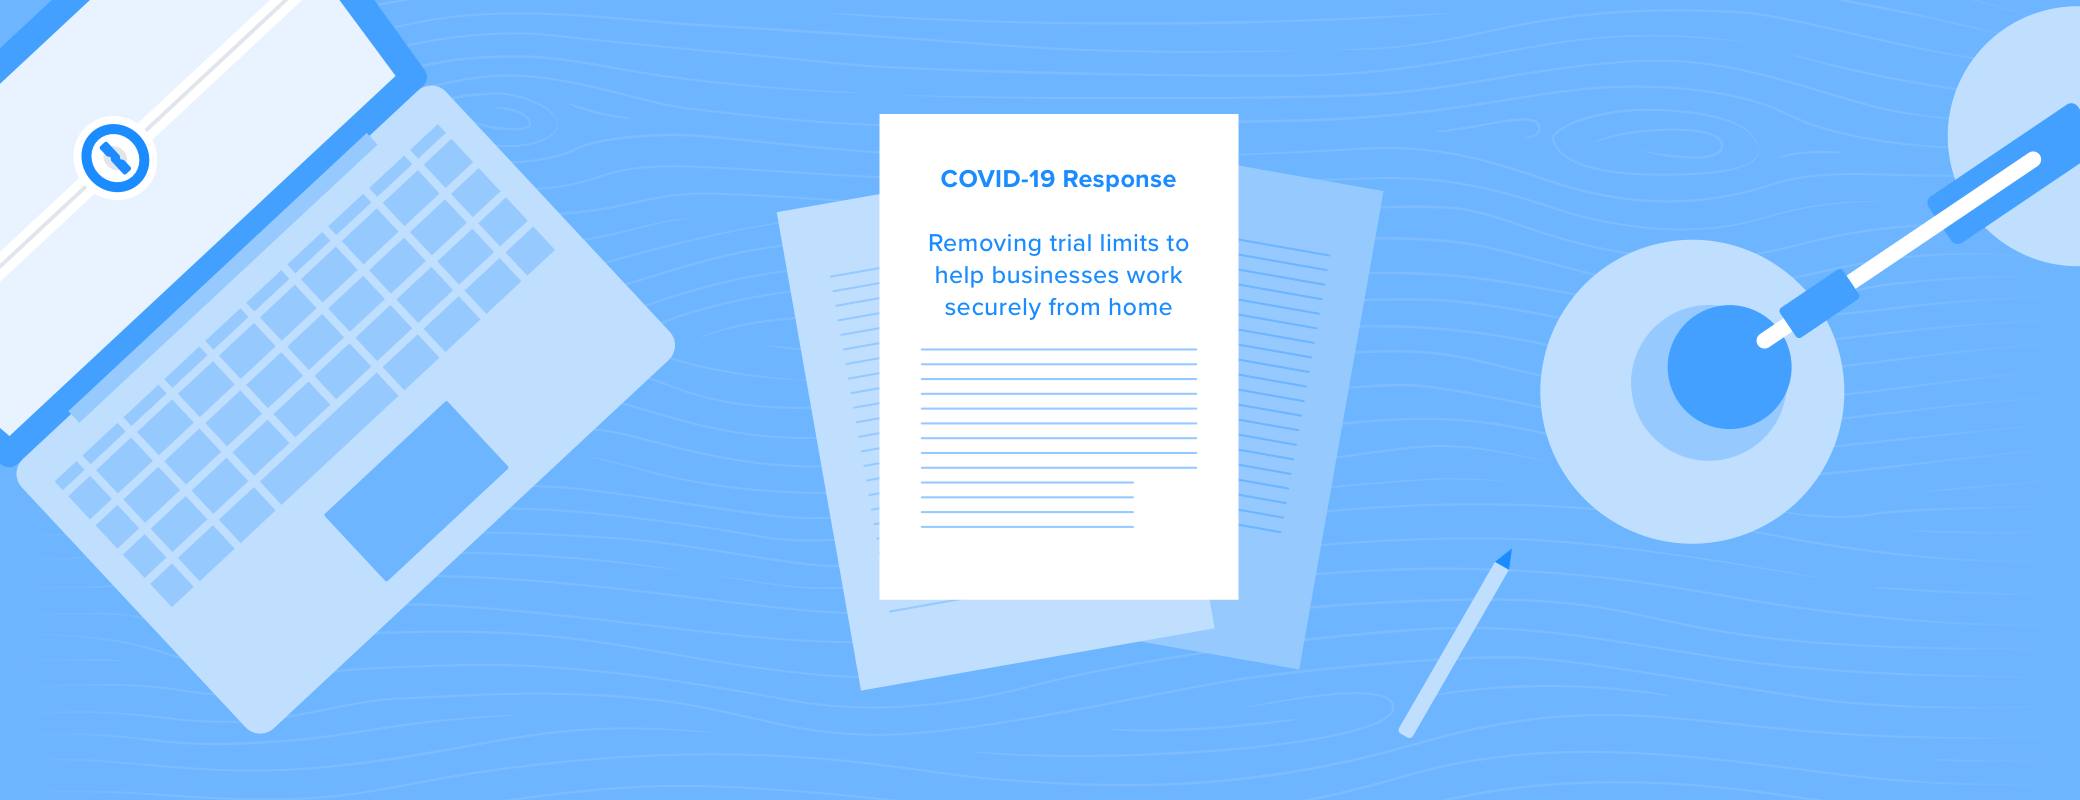 COVID-19 Response - Removing trial limits to help businesses work securely from home